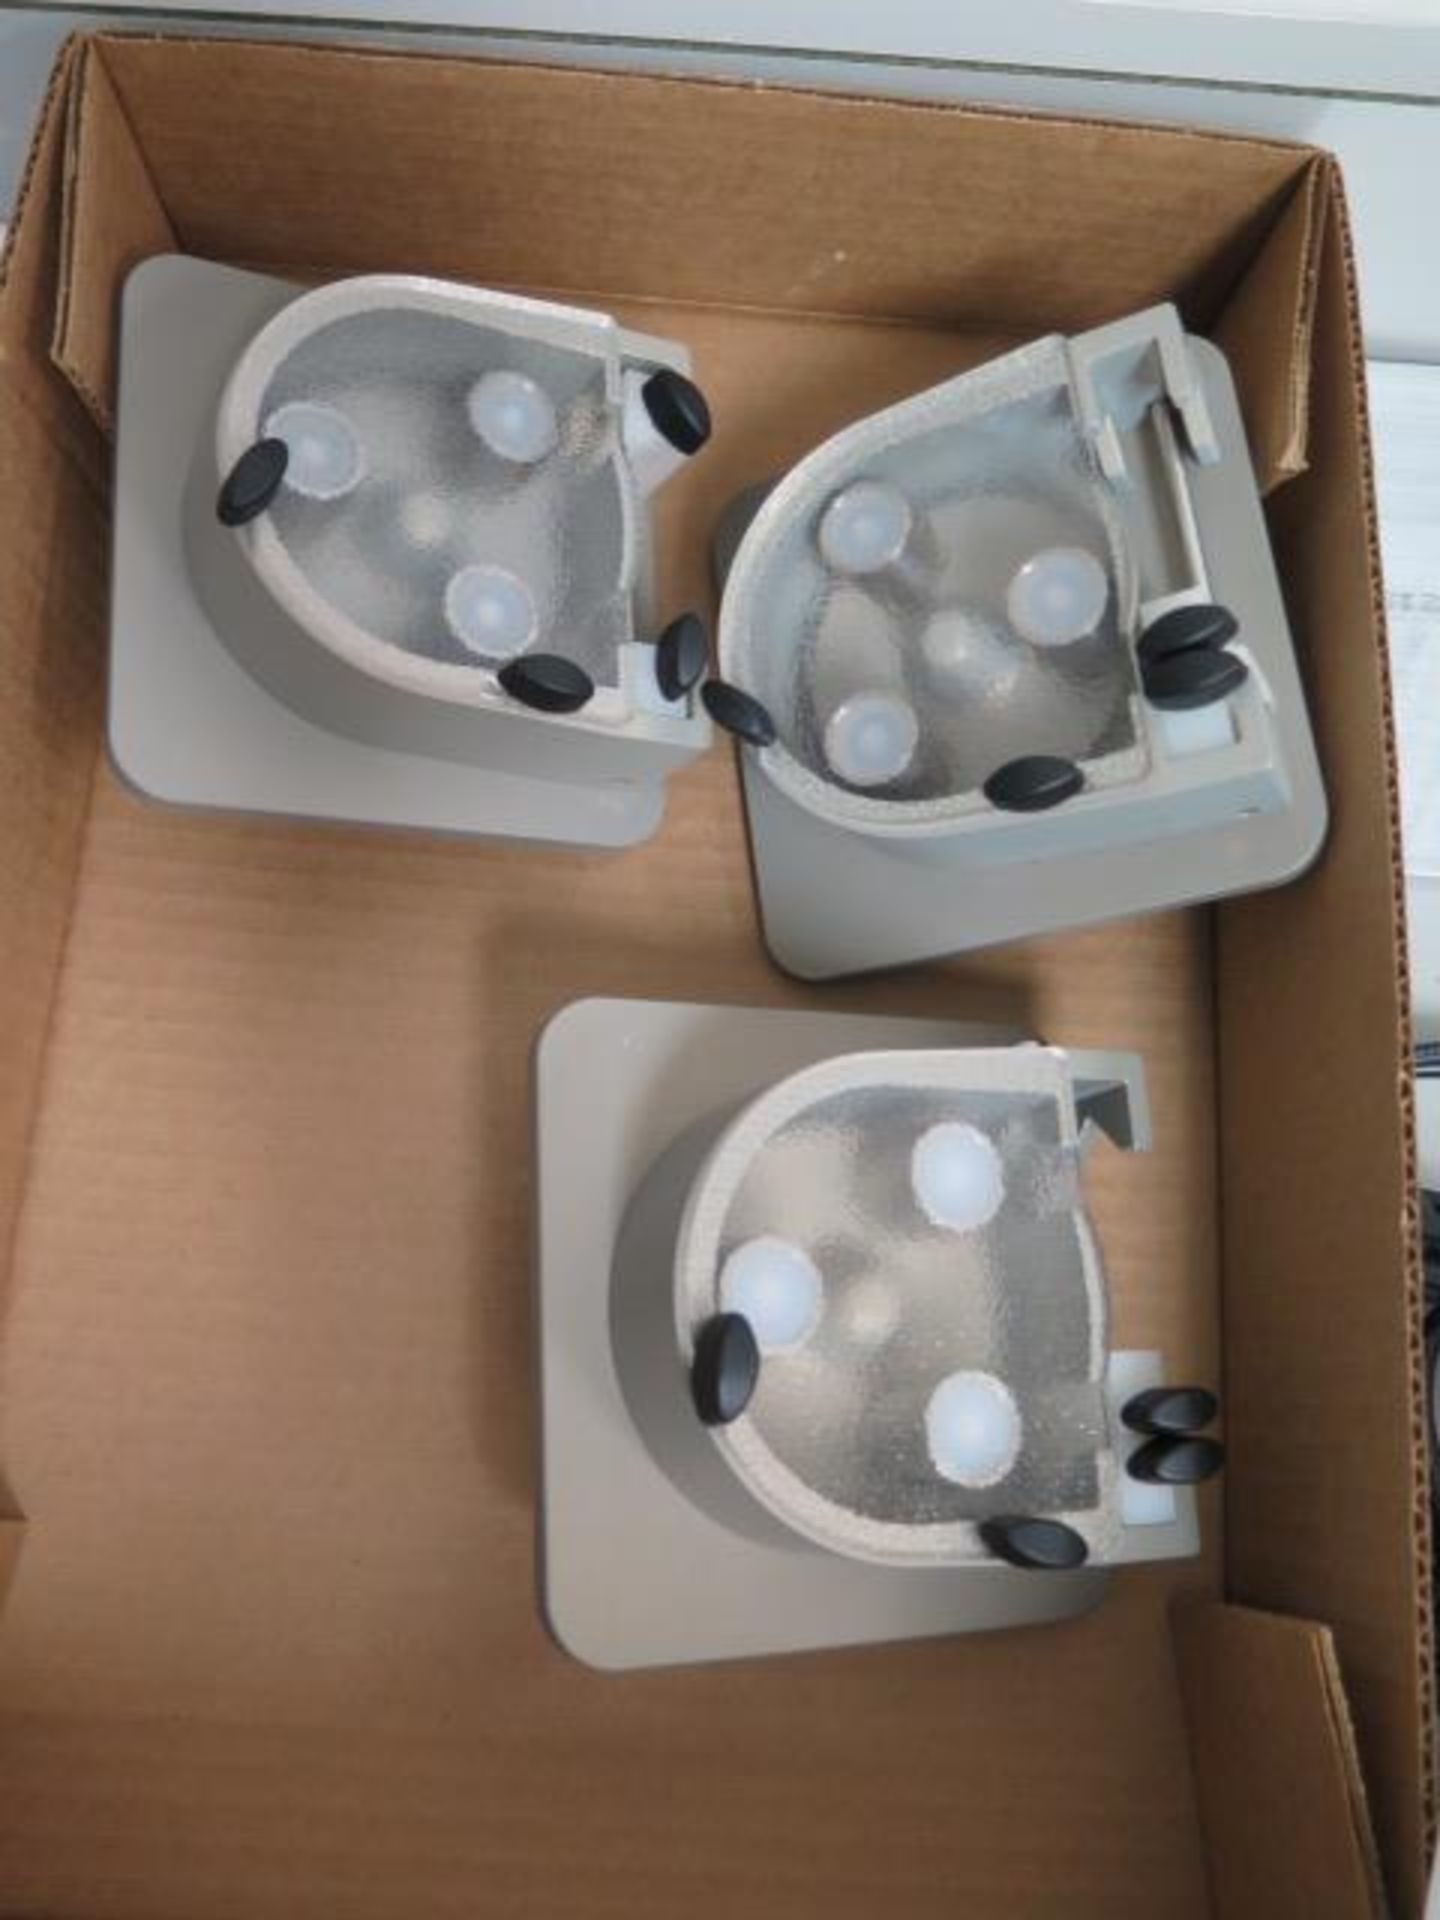 Cole-Parmer mdl. 78-002-22 Peristaltic Pump s/n ISM404-0472 w/ (4) IMS971 Cartridge Pump Heads (SOLD - Image 6 of 7